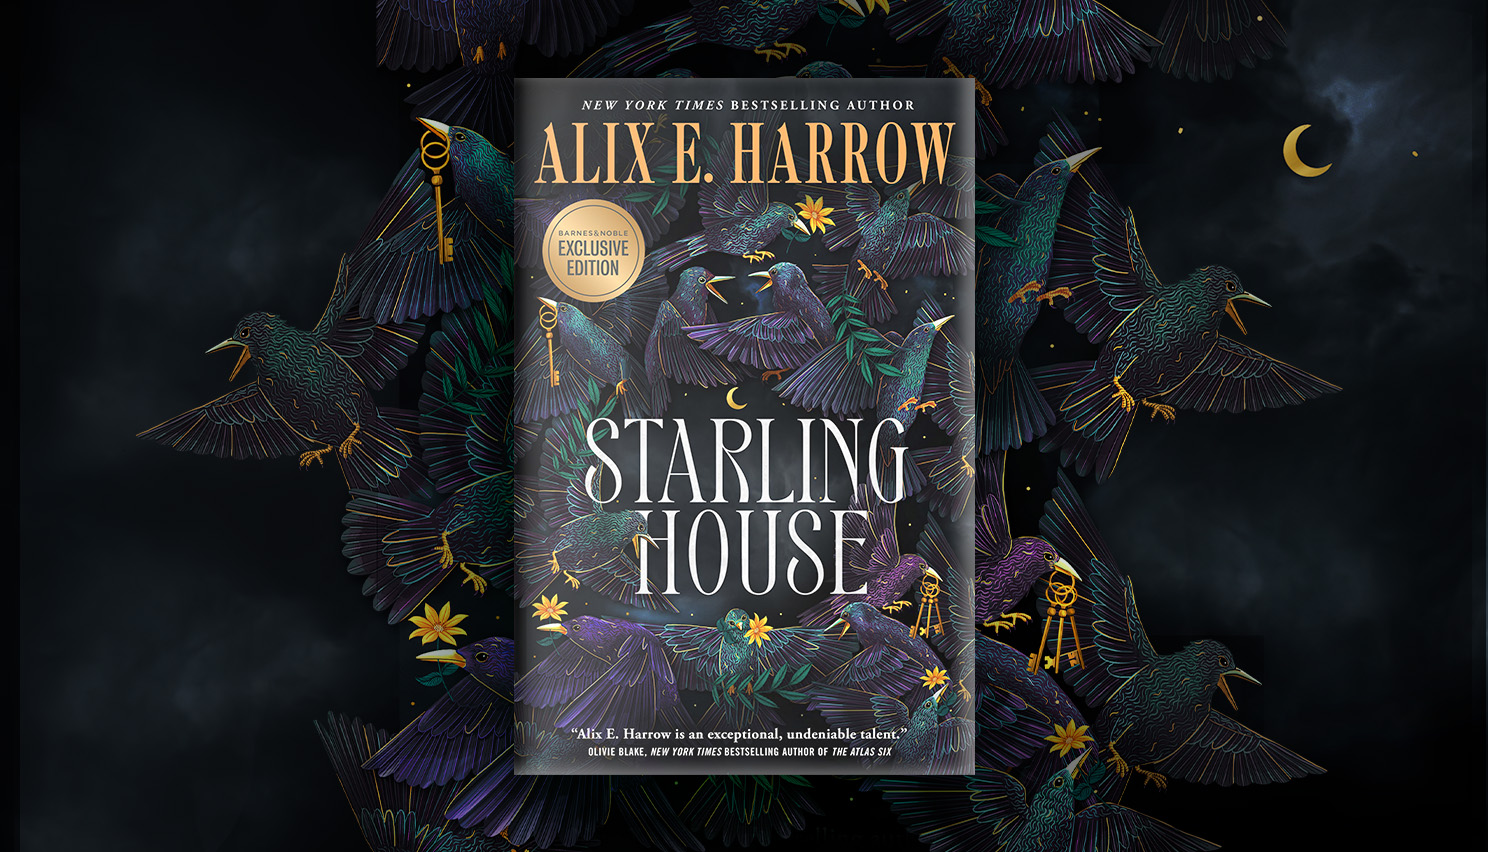 Poured Over: Alix E. Harrow on Starling House - B&N Reads